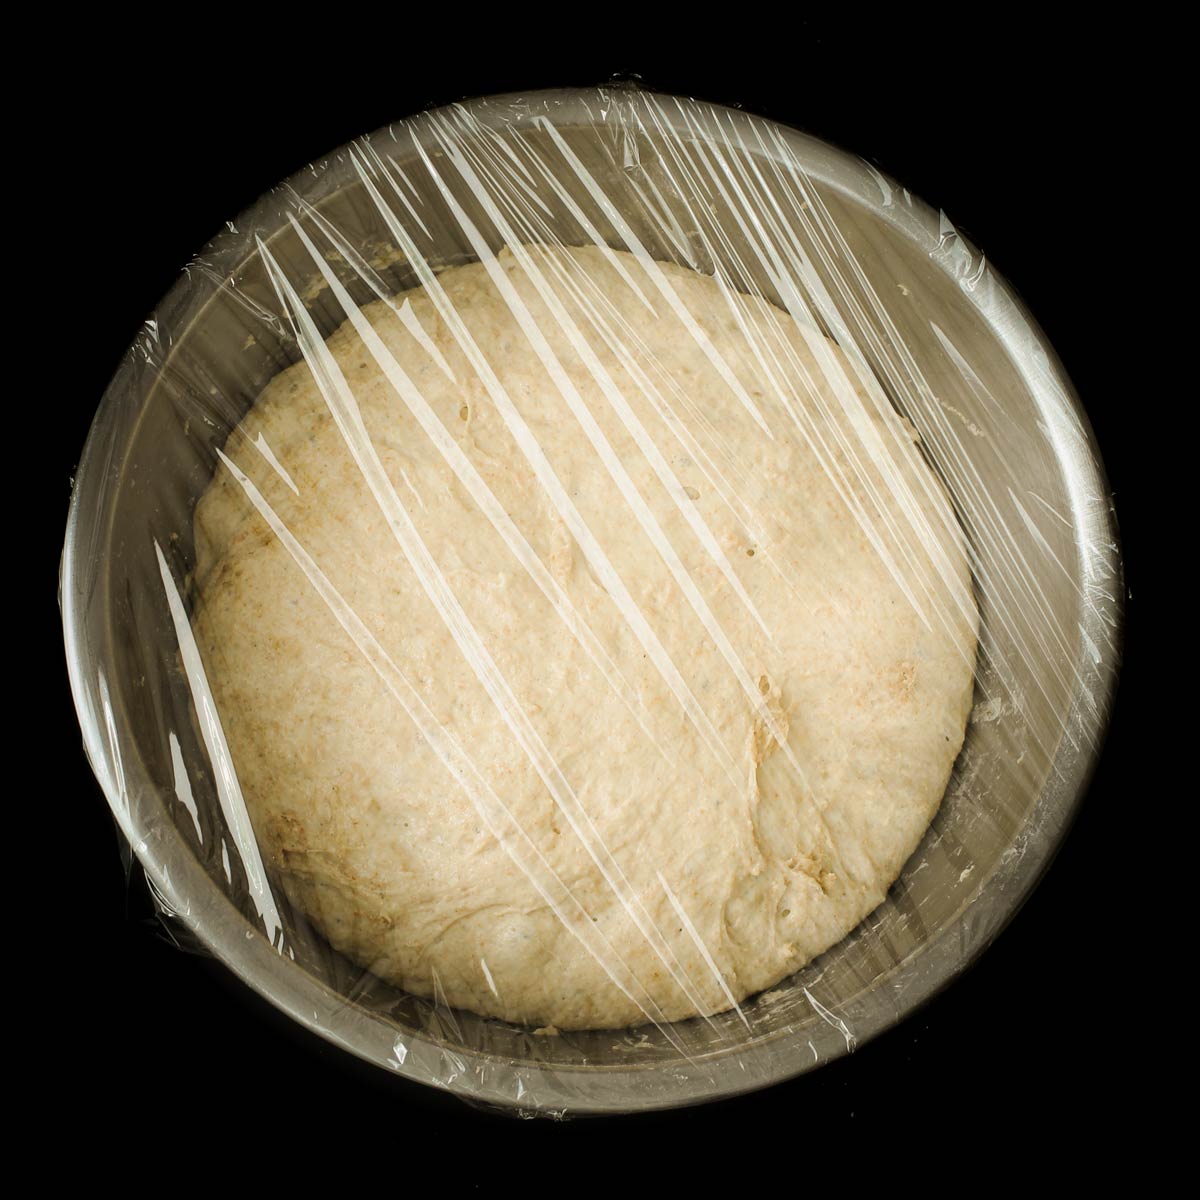 dough ball risen in metal bowl covered with plastic wrap.